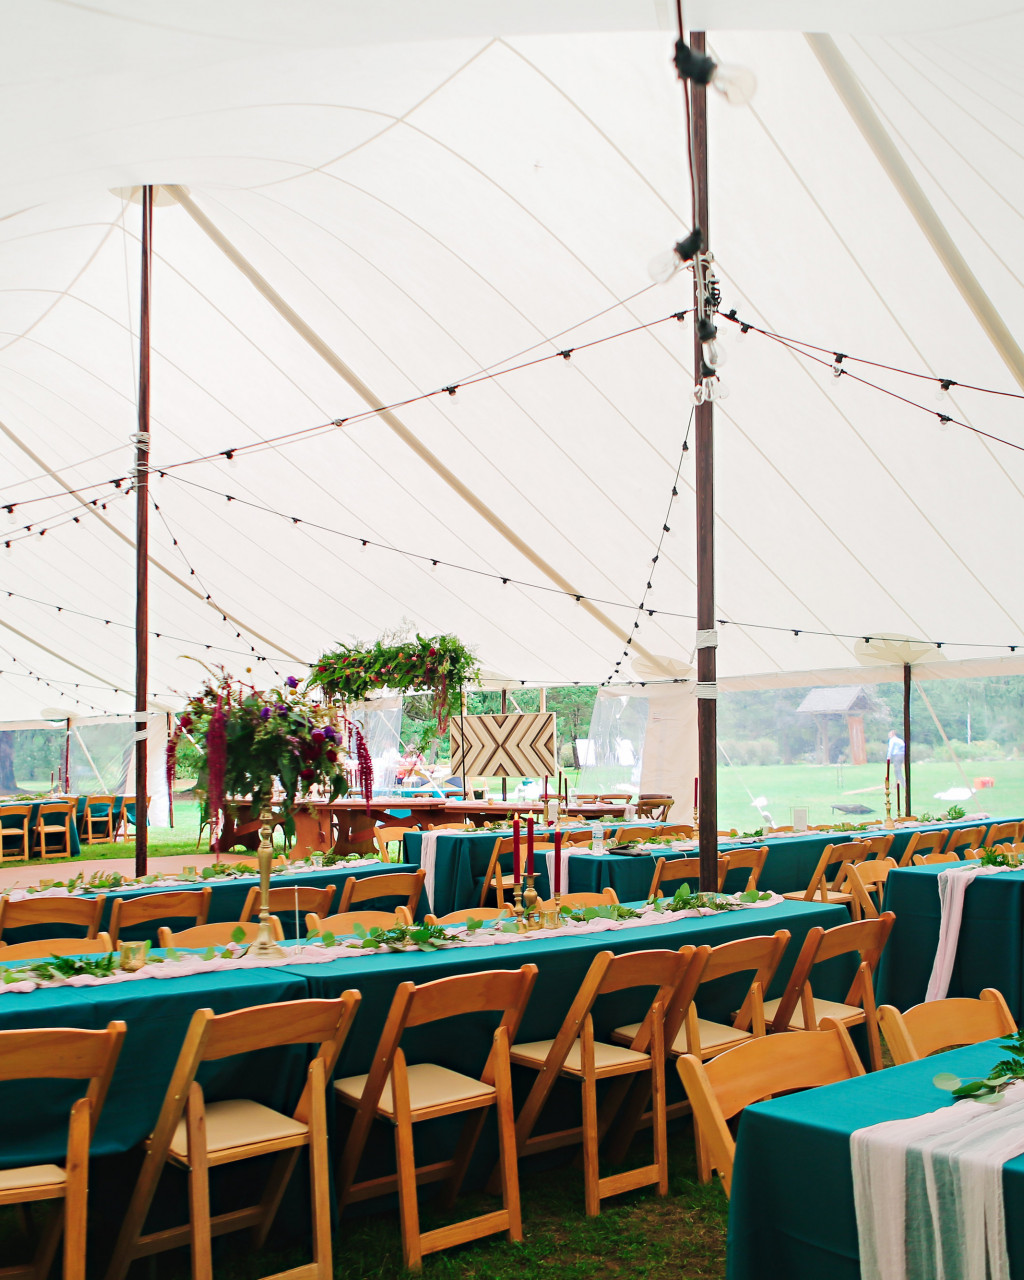 A Sailcloth Tent with a Beautiful Exterior | Mutton Party and Tent Rental